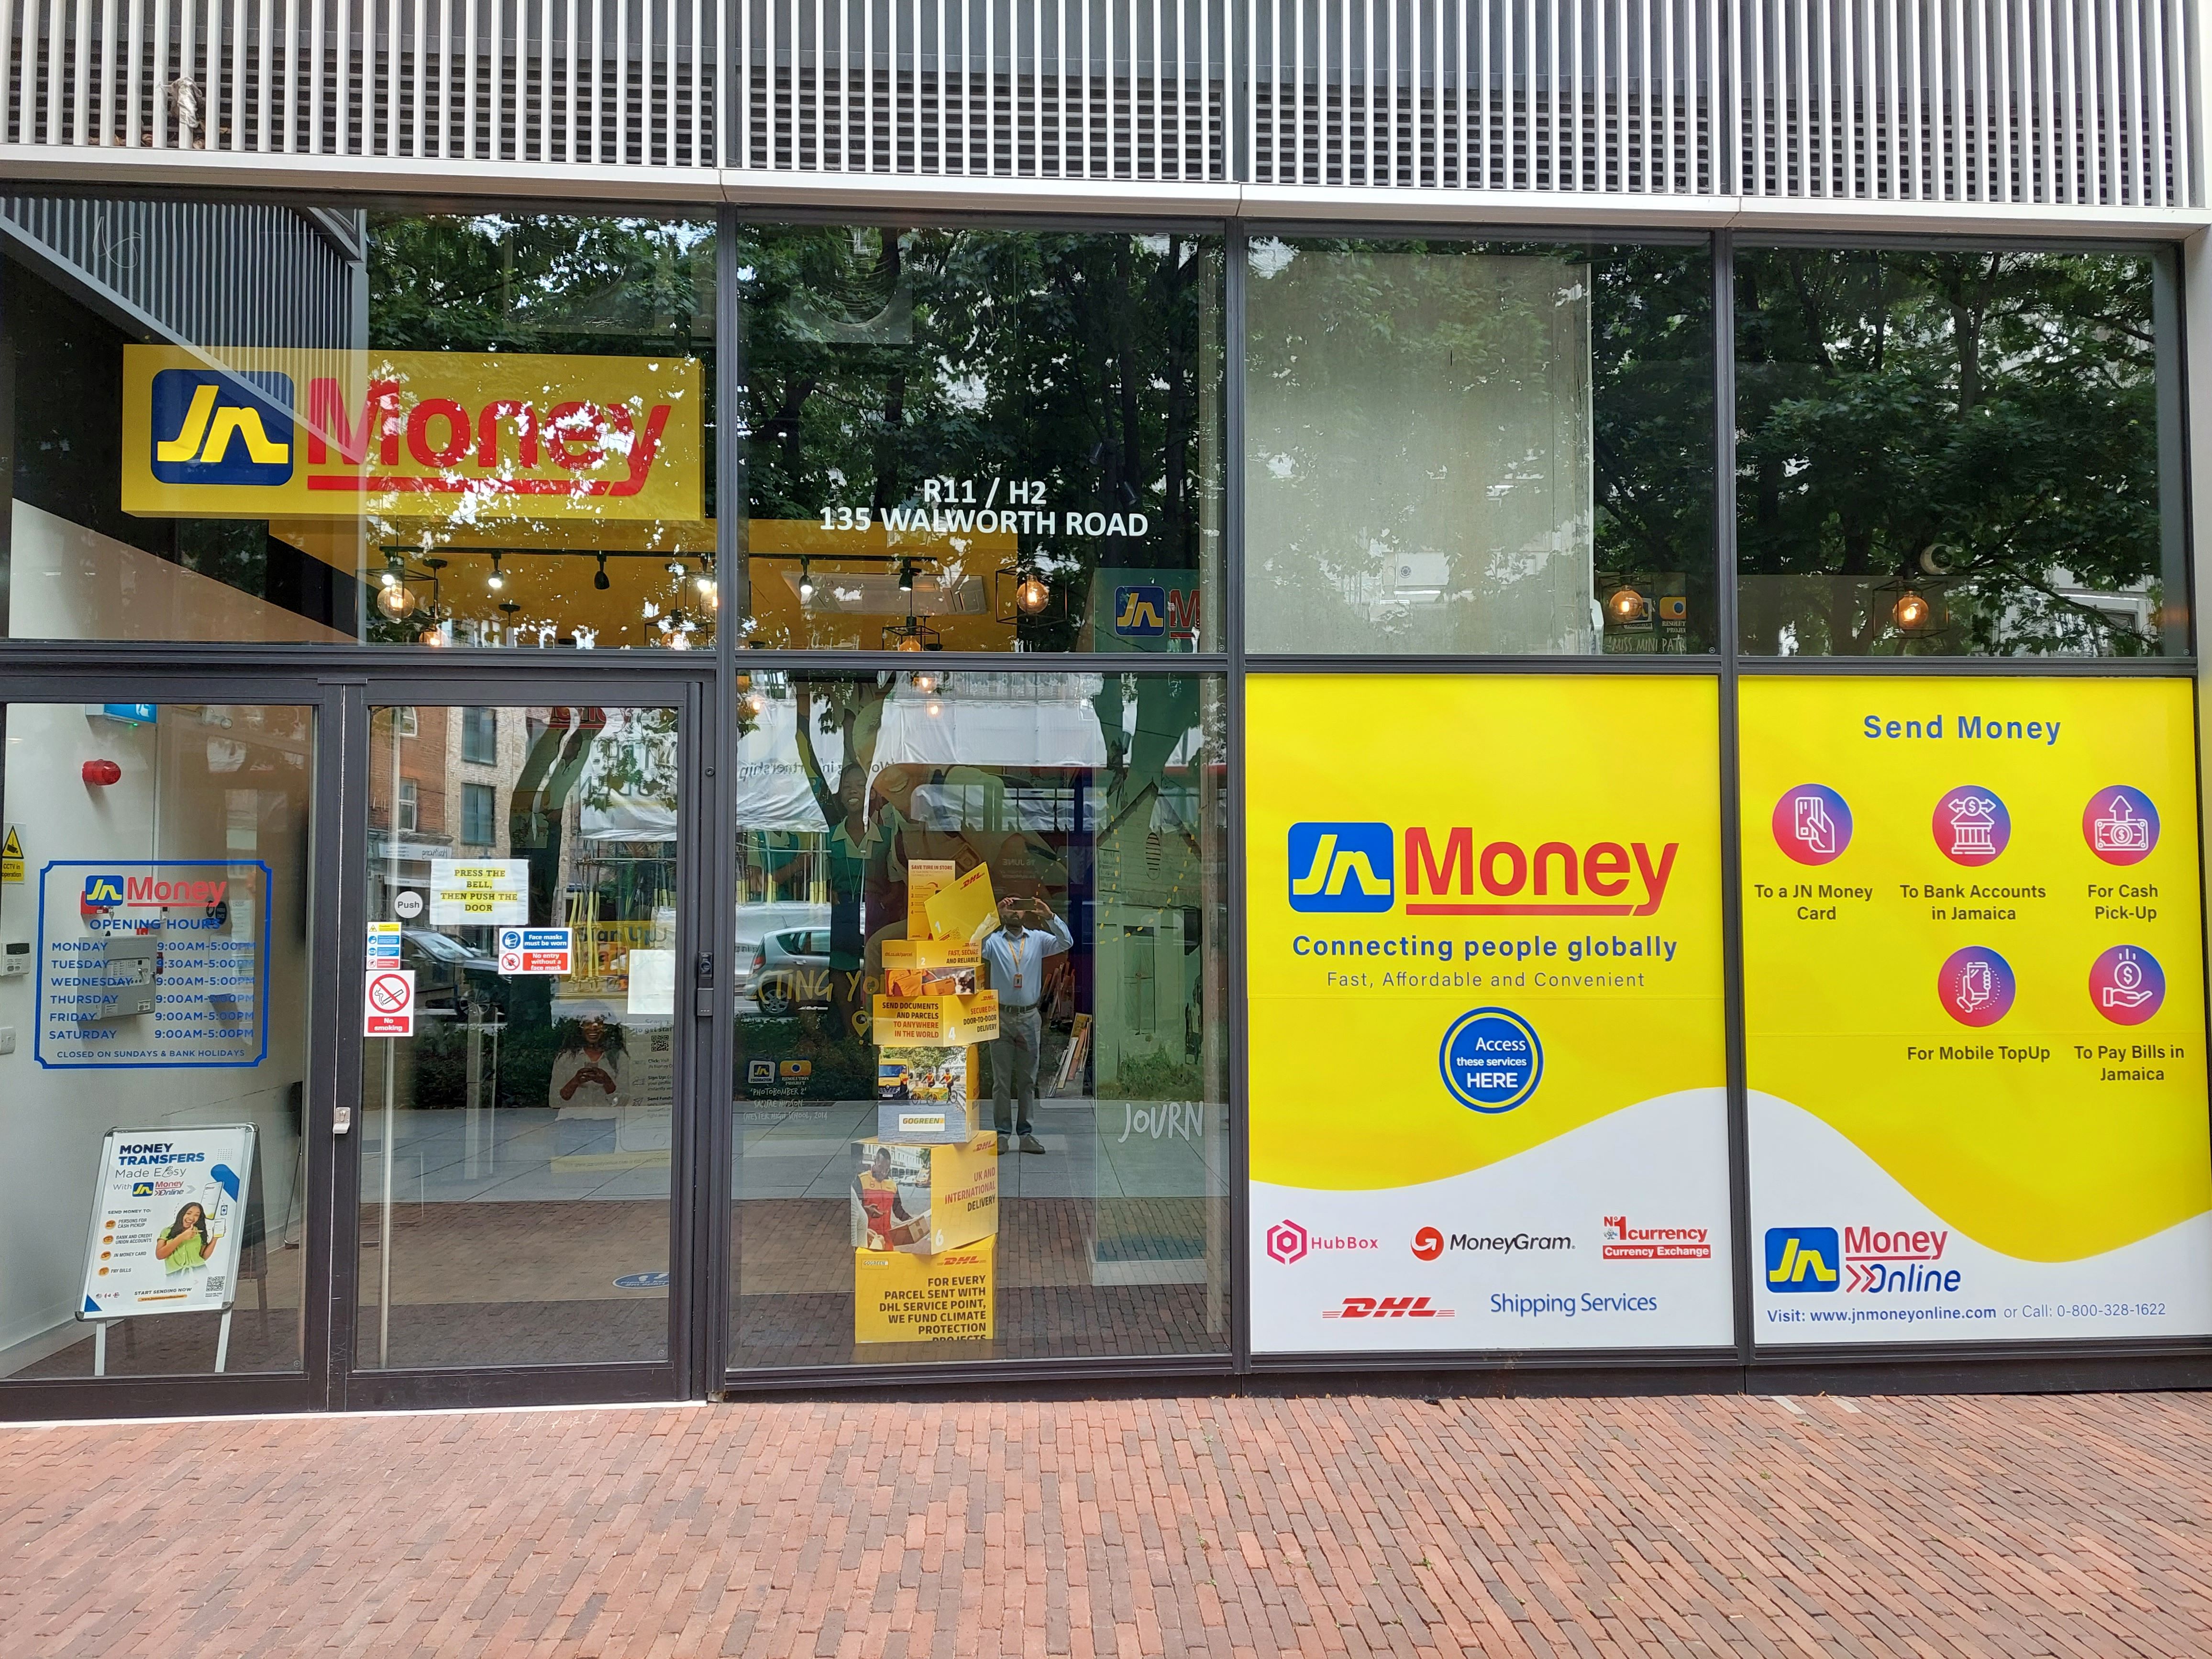 Images DHL Express Service Point (JN Money Elephant and Castle)